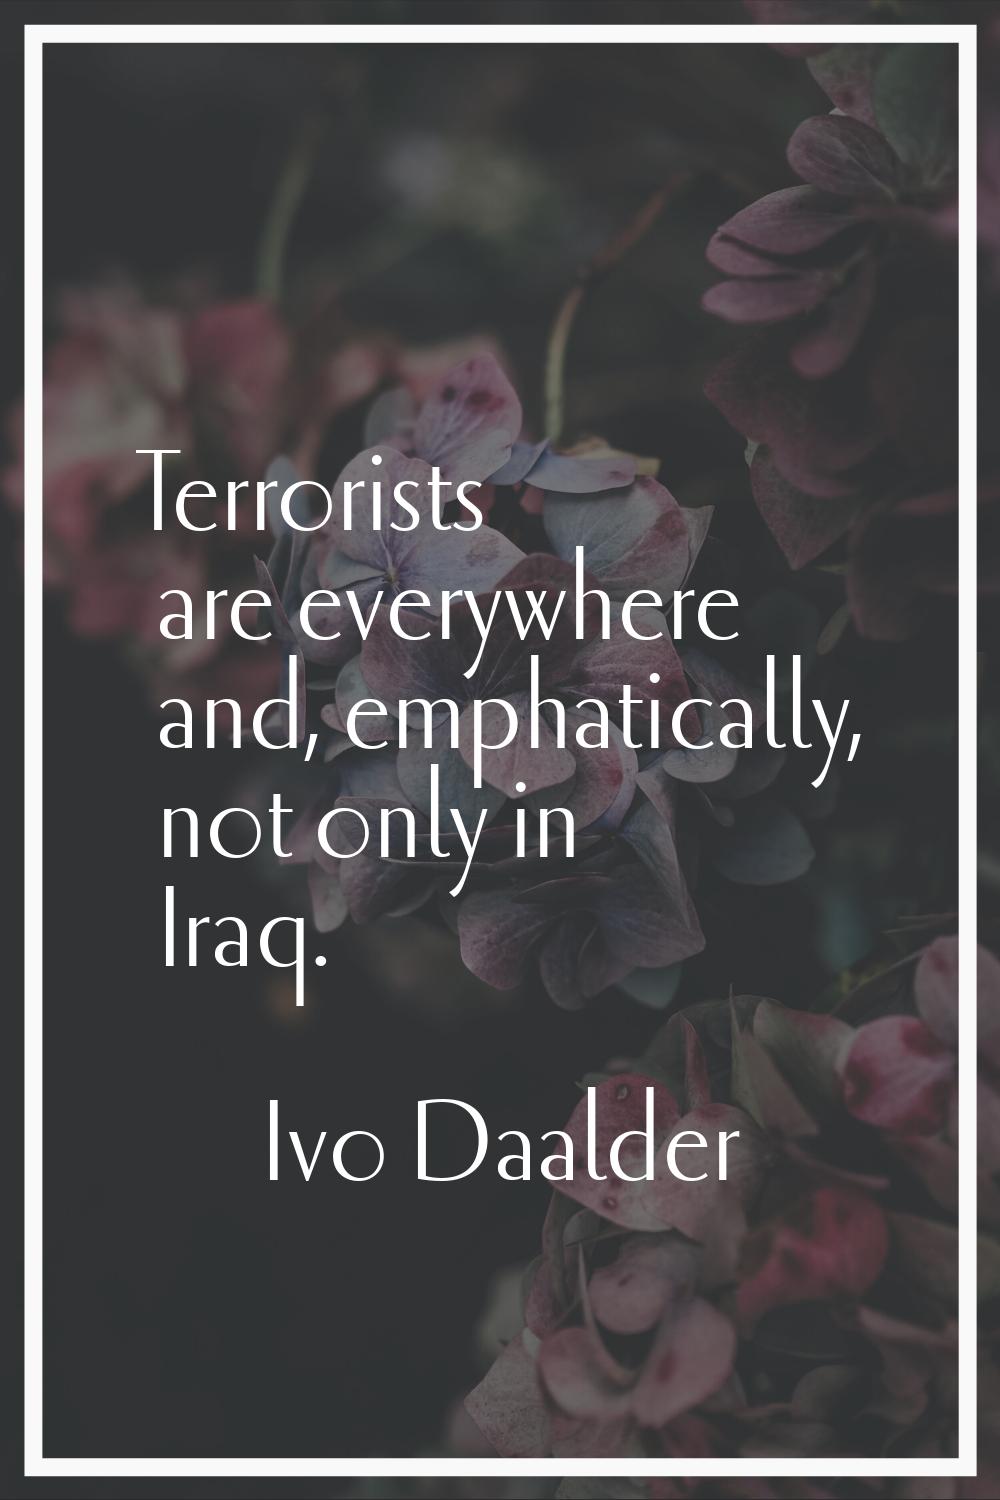 Terrorists are everywhere and, emphatically, not only in Iraq.